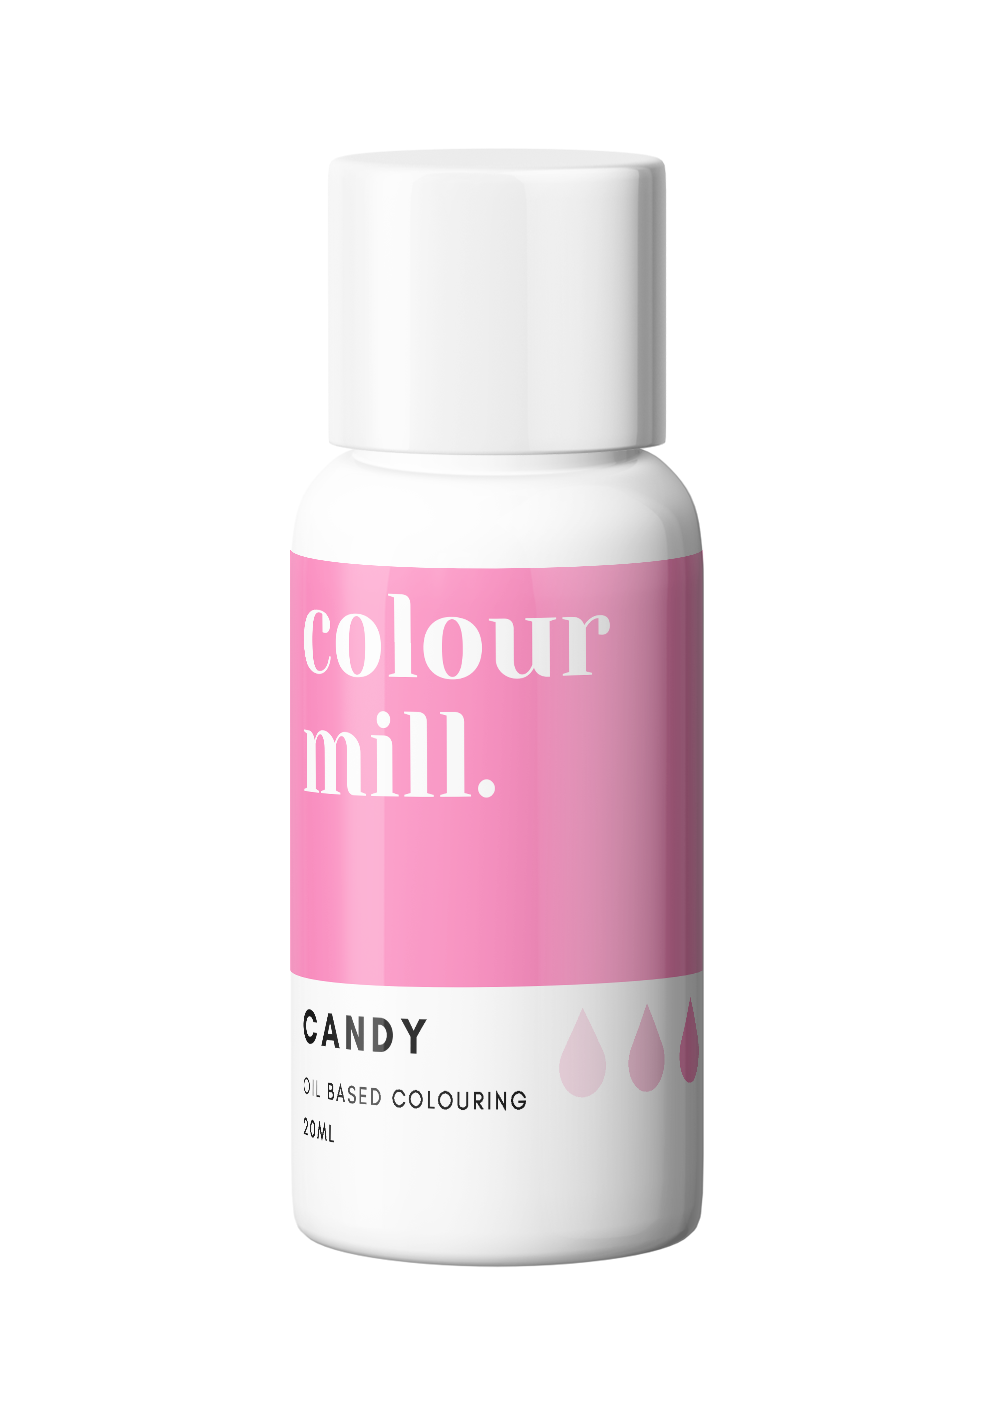 CANDY - 20ml Colour Mill